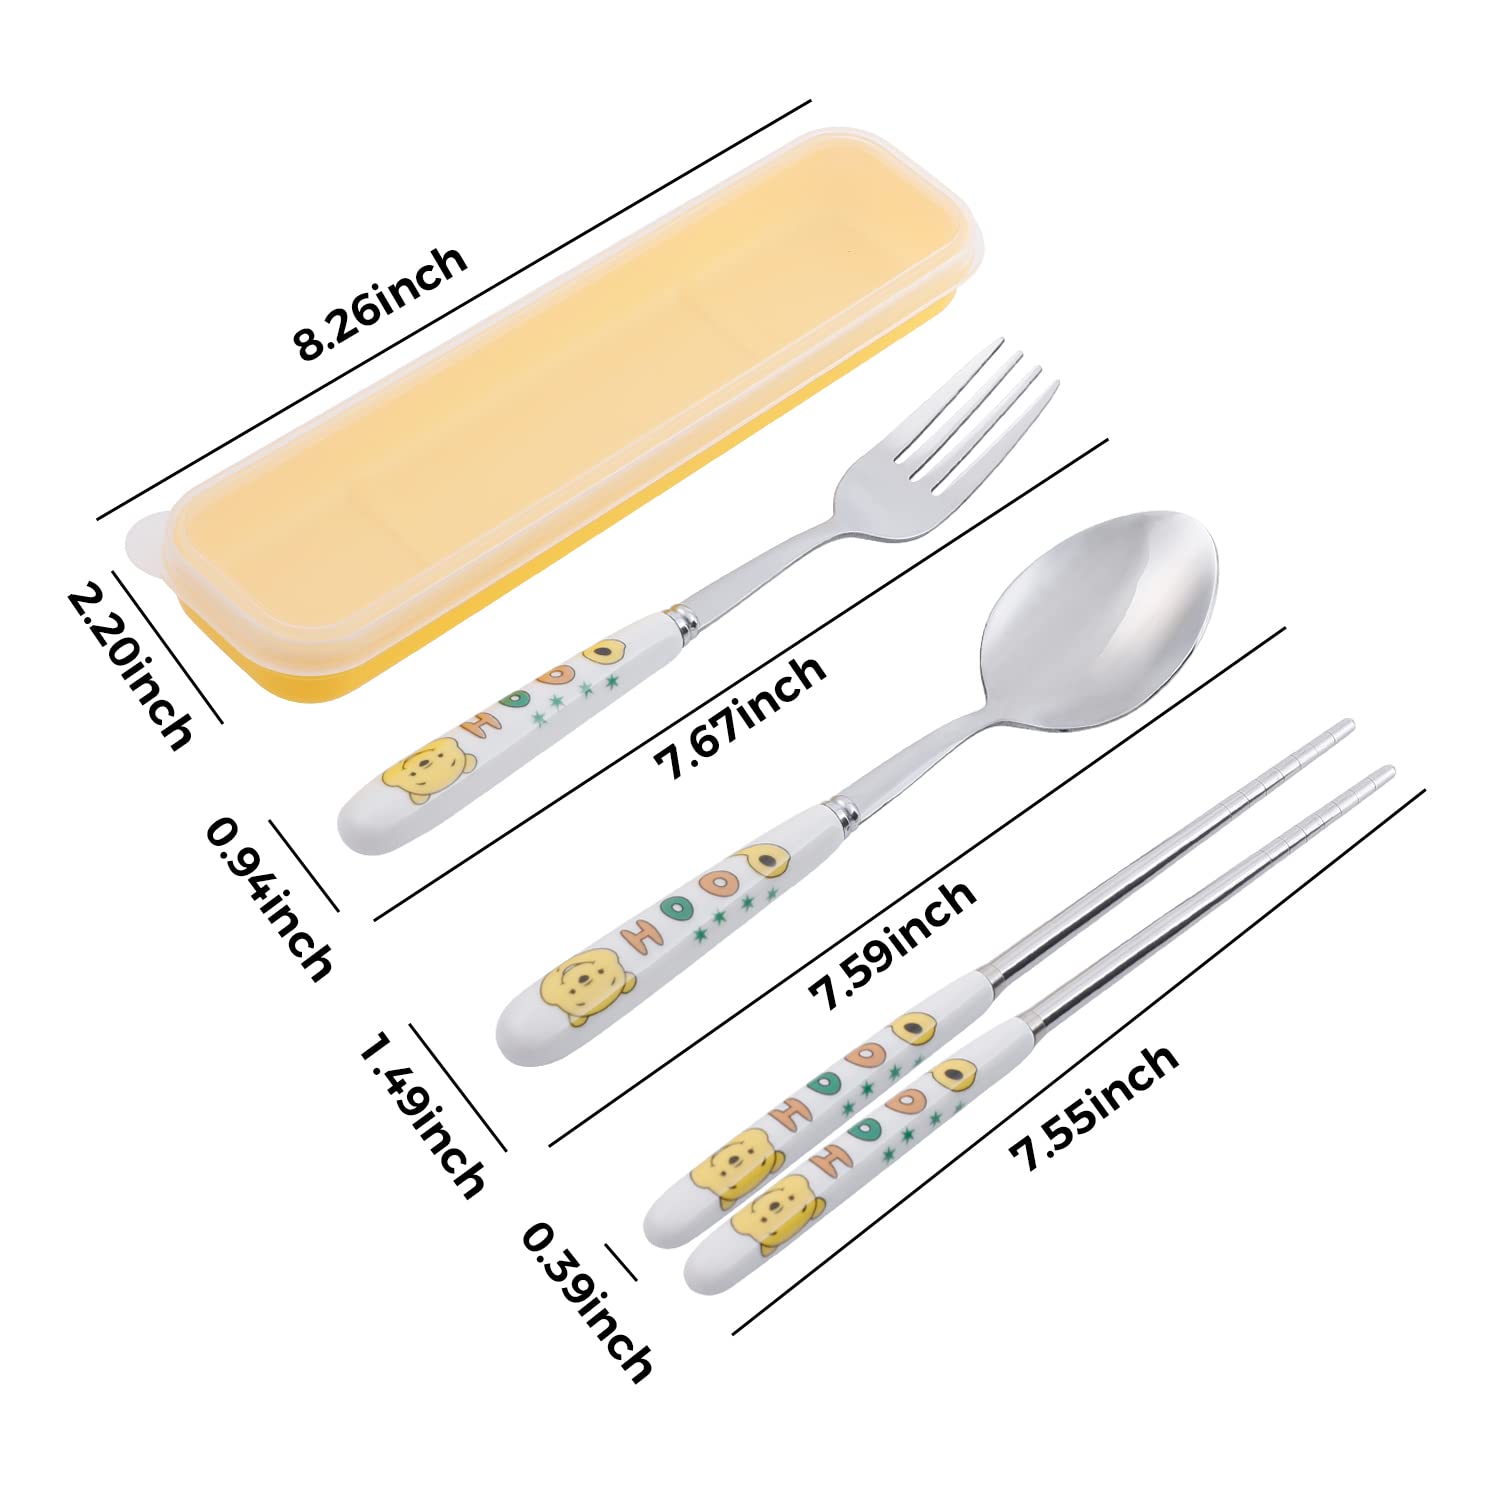 Pooh Portable Camp Reusable Flatware Cute Pooh Bear Travel Utensils Case with Stainless Steel Fork Spoon Chopsticks(SCF-Pooh)